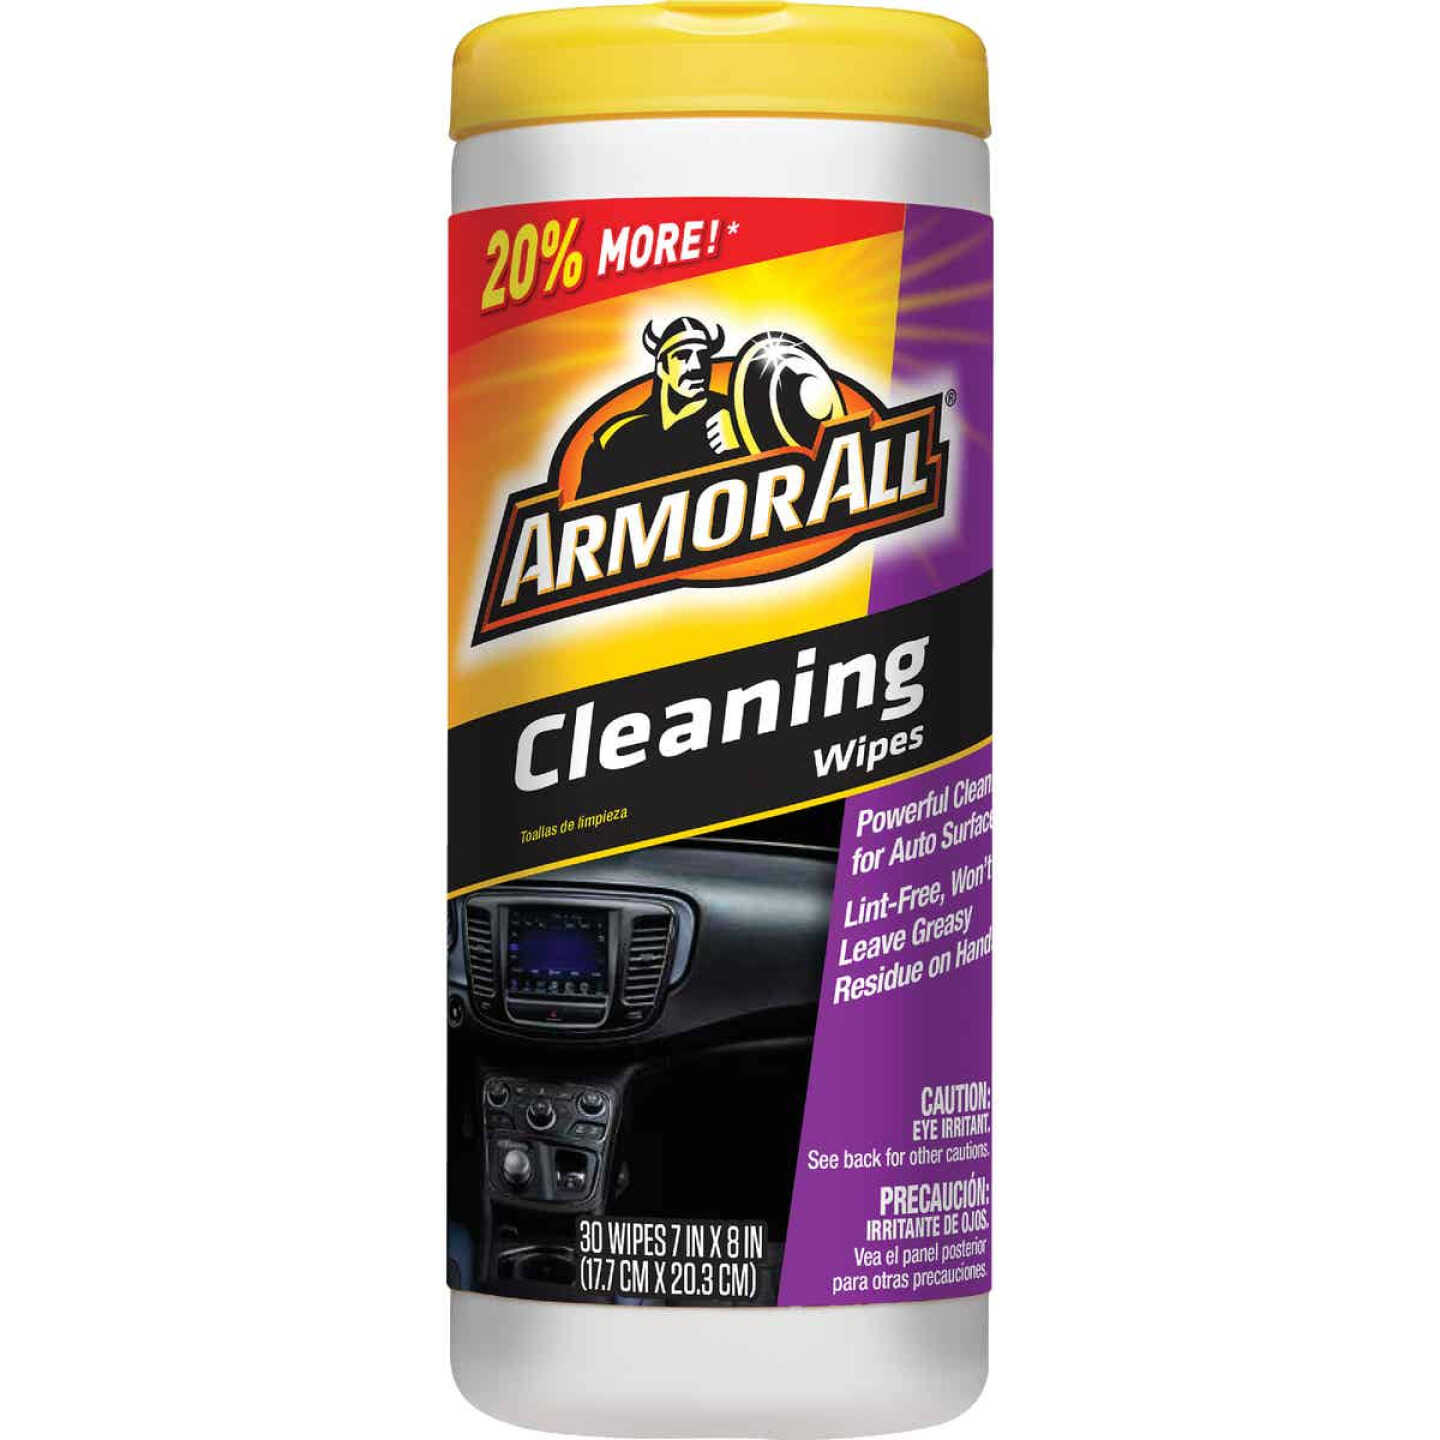 Armor All Unscented 7 In. x 8 In. Multi-Purpose Cleaning Wipes (30-Count) -  Town Hardware & General Store